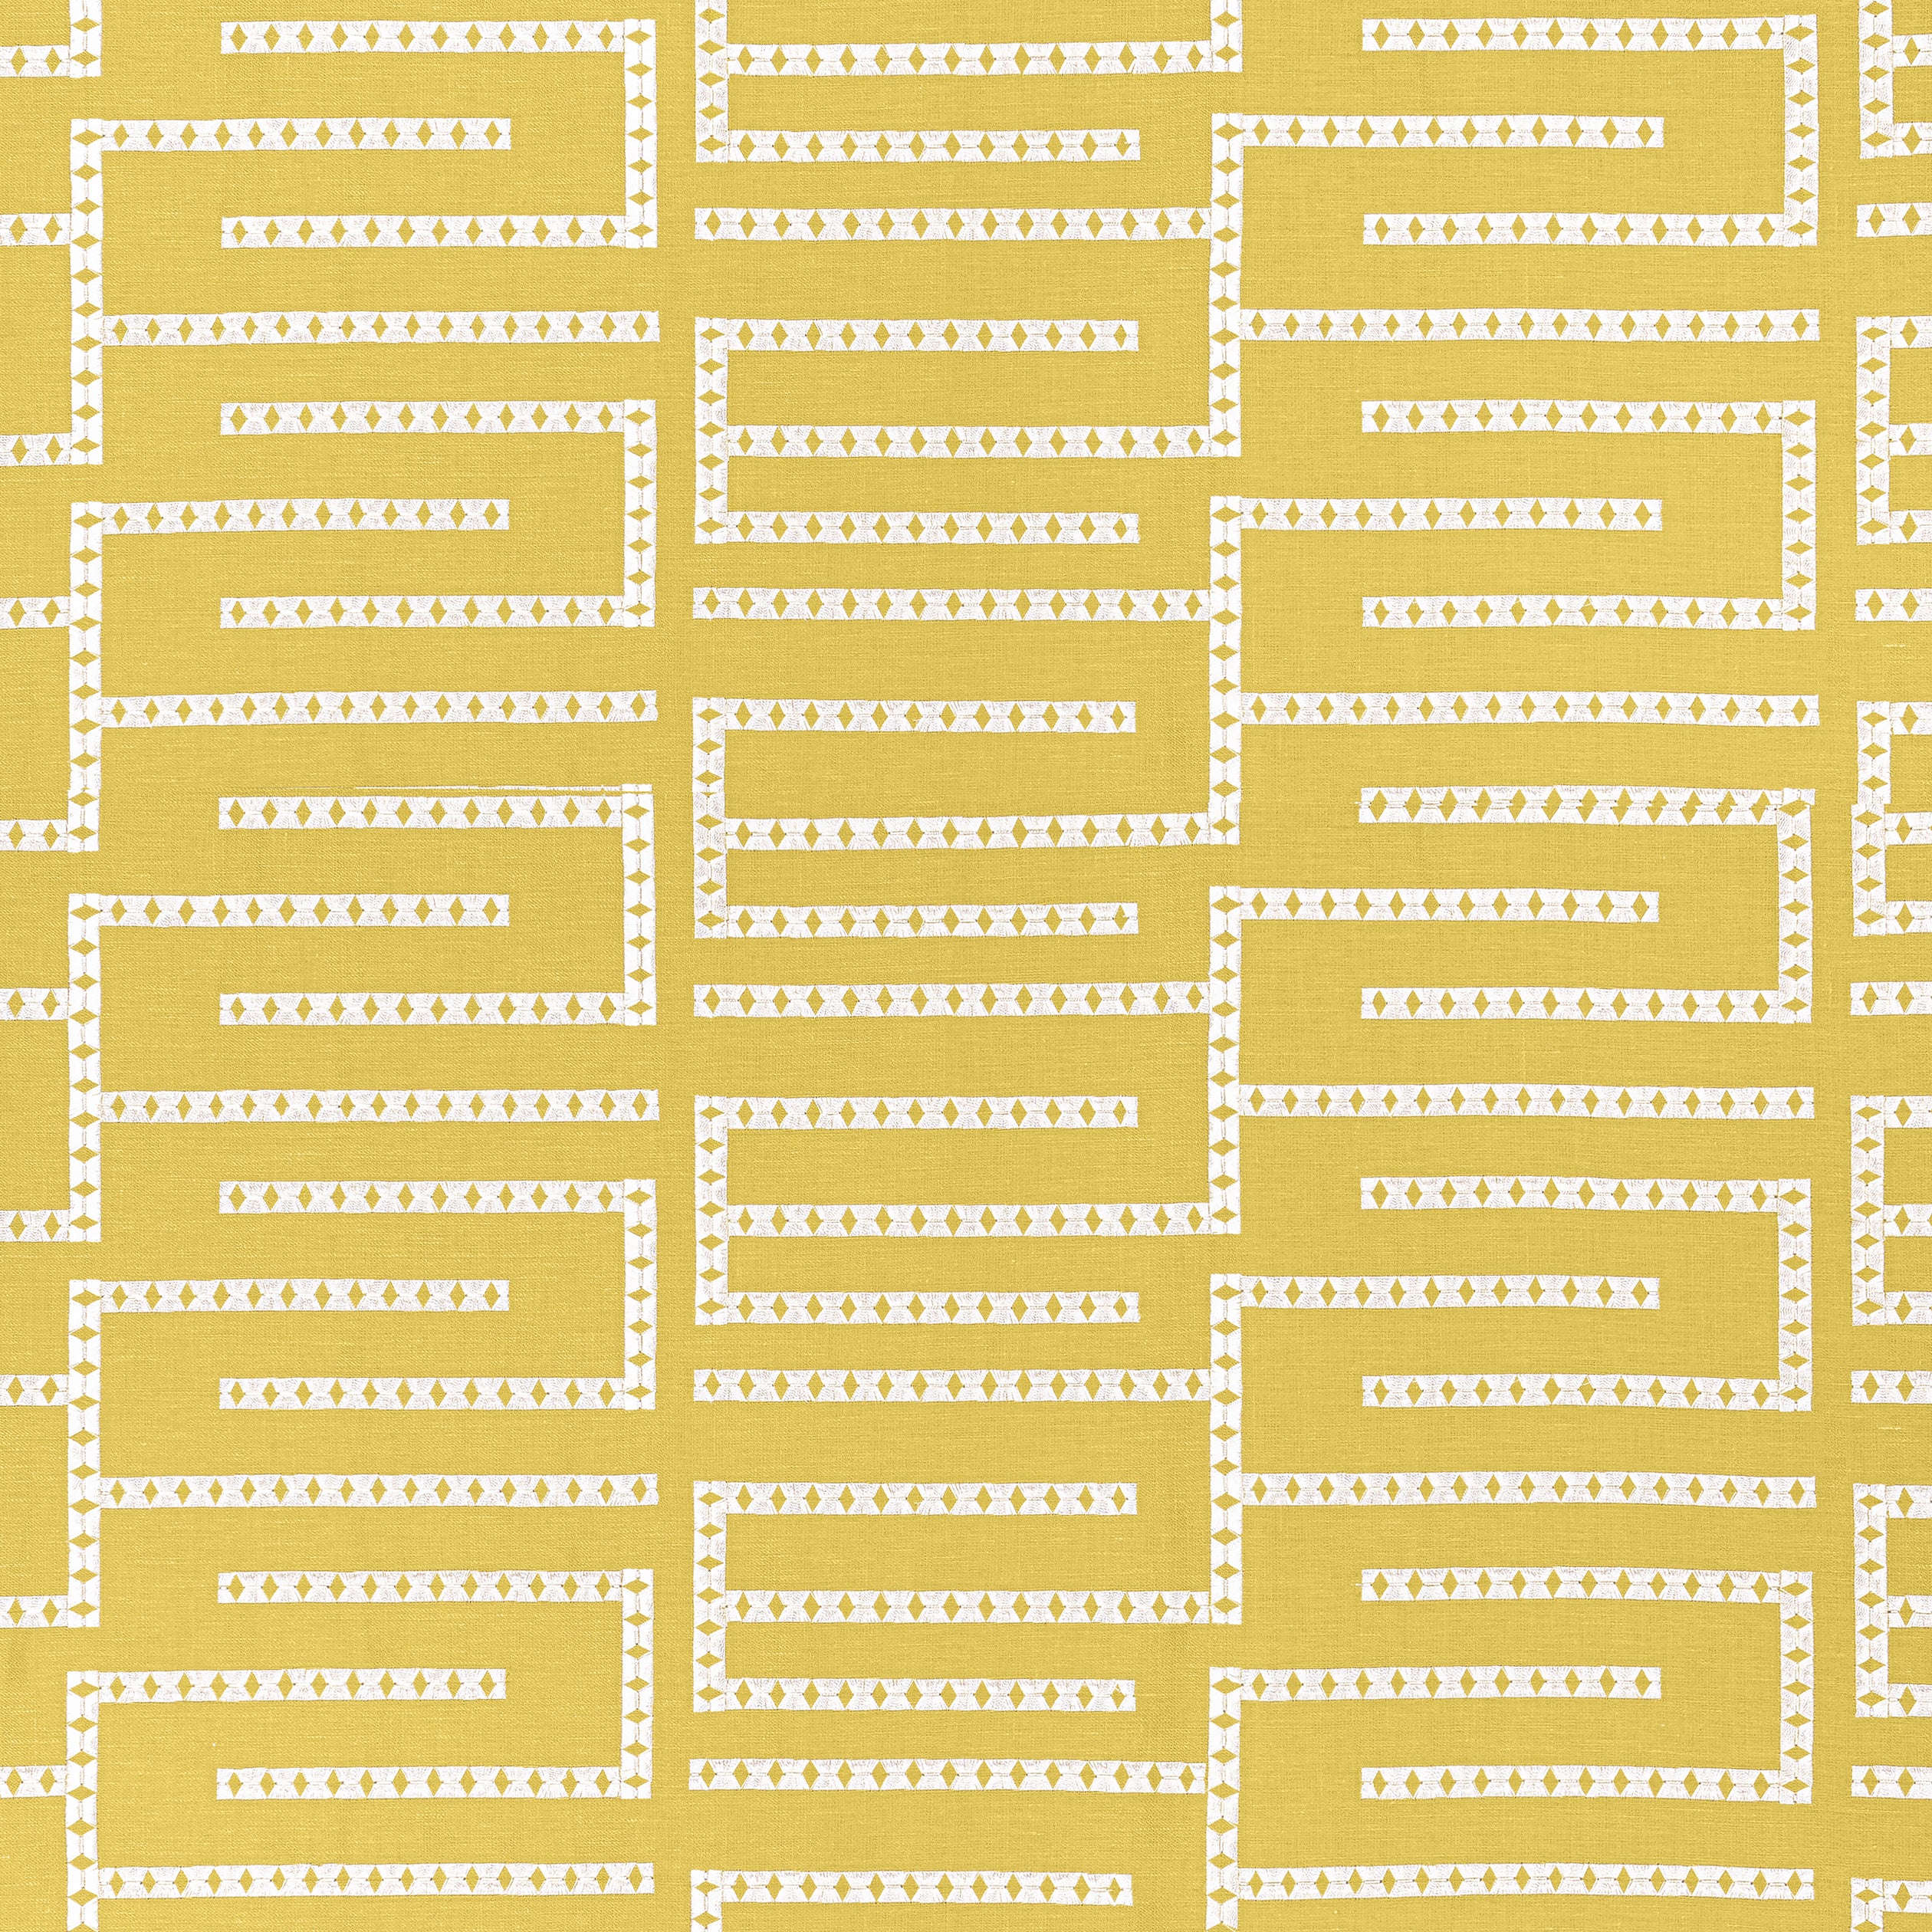 Architect Embroidery fabric in harvest gold - pattern number W713632 - by Thibaut in the Grand Palace collection